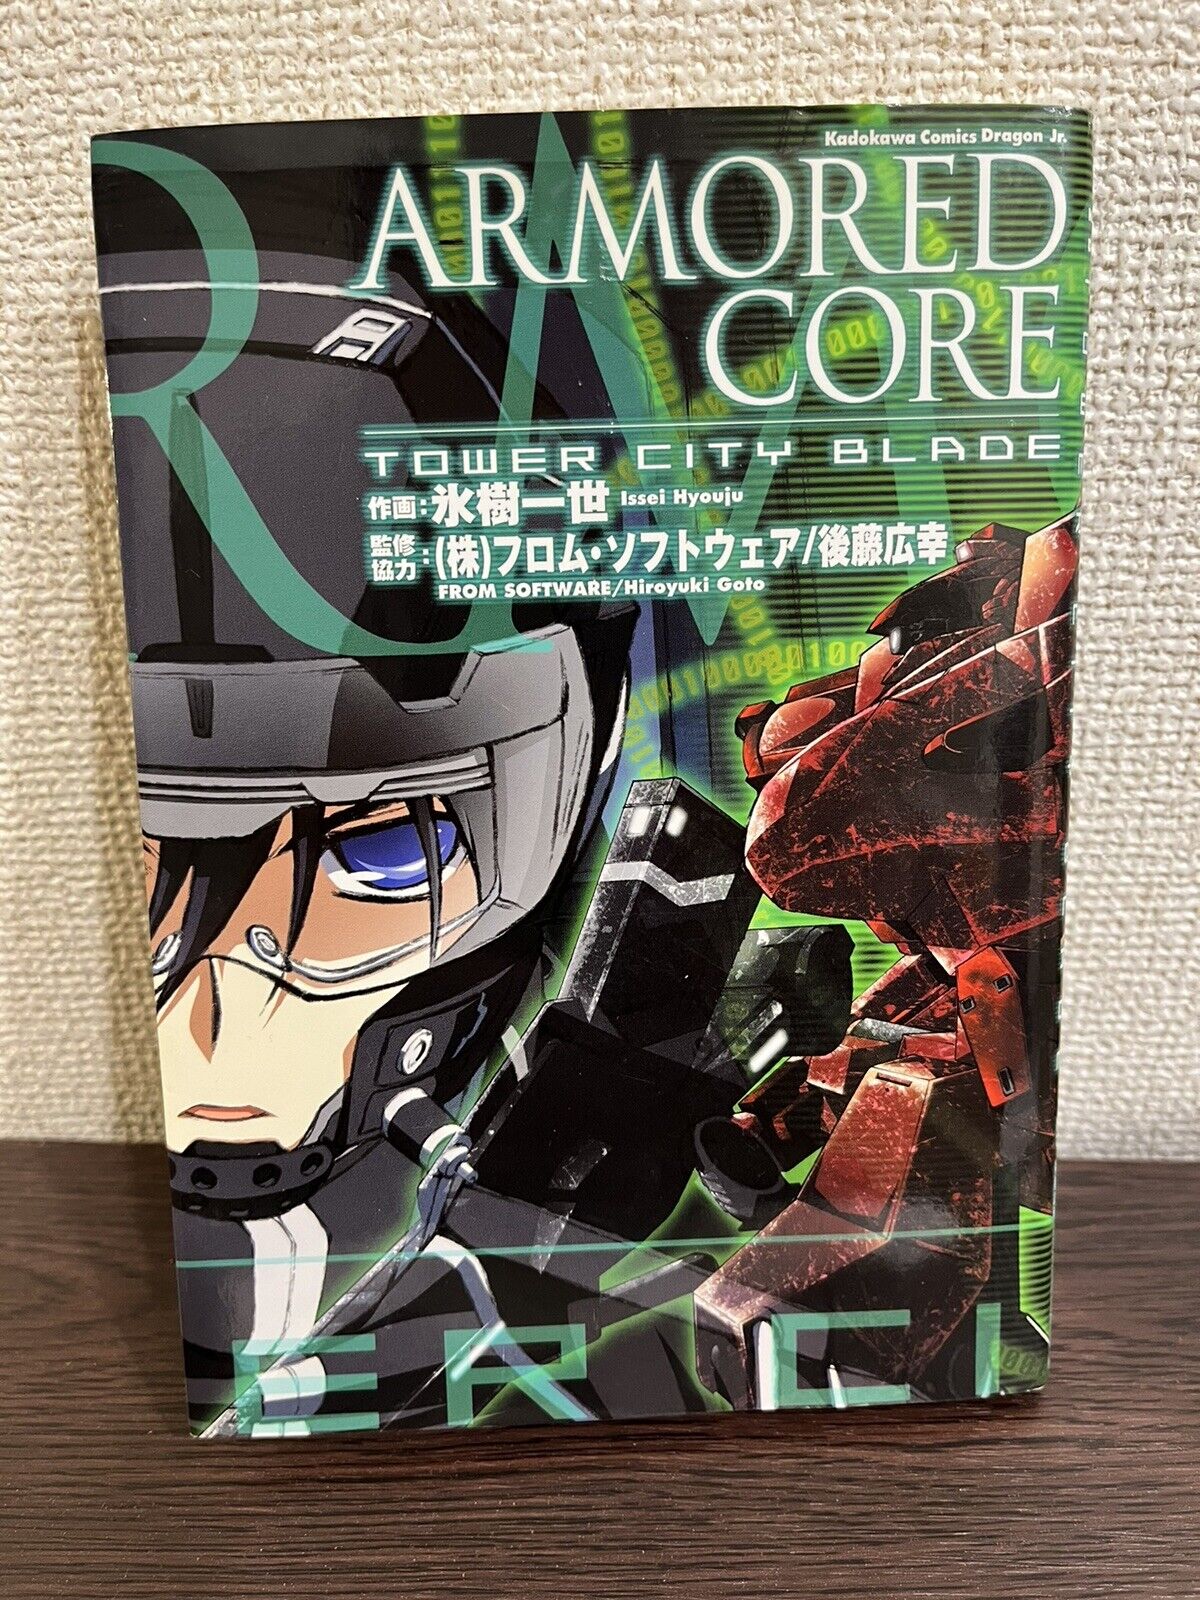 Armored core tower city blade